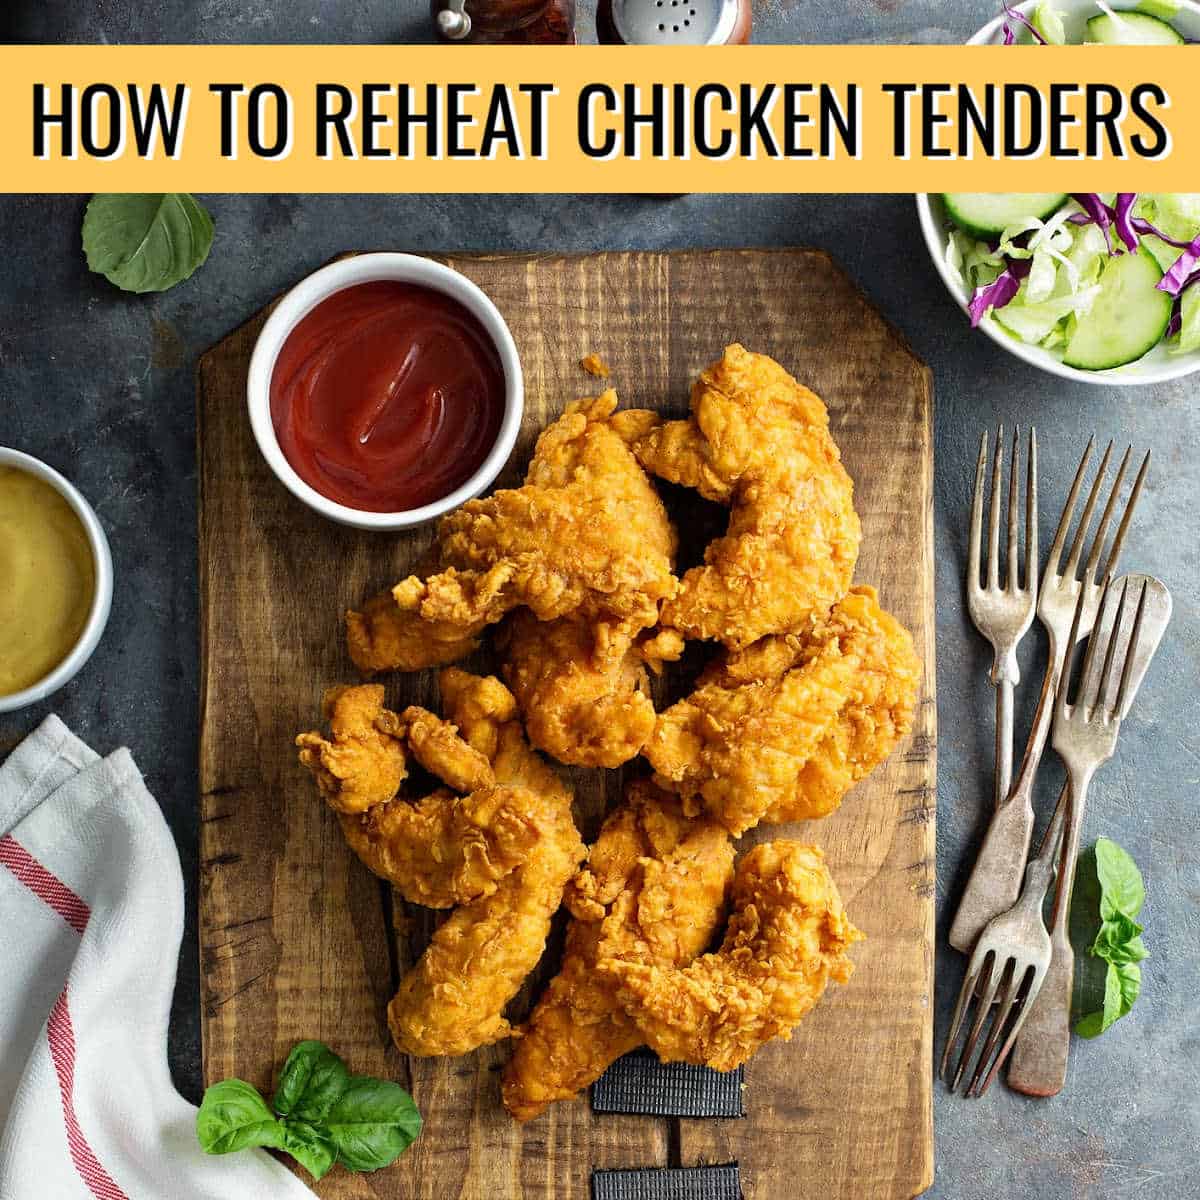 chicken on a board with text "how to reheat chicken tenders"